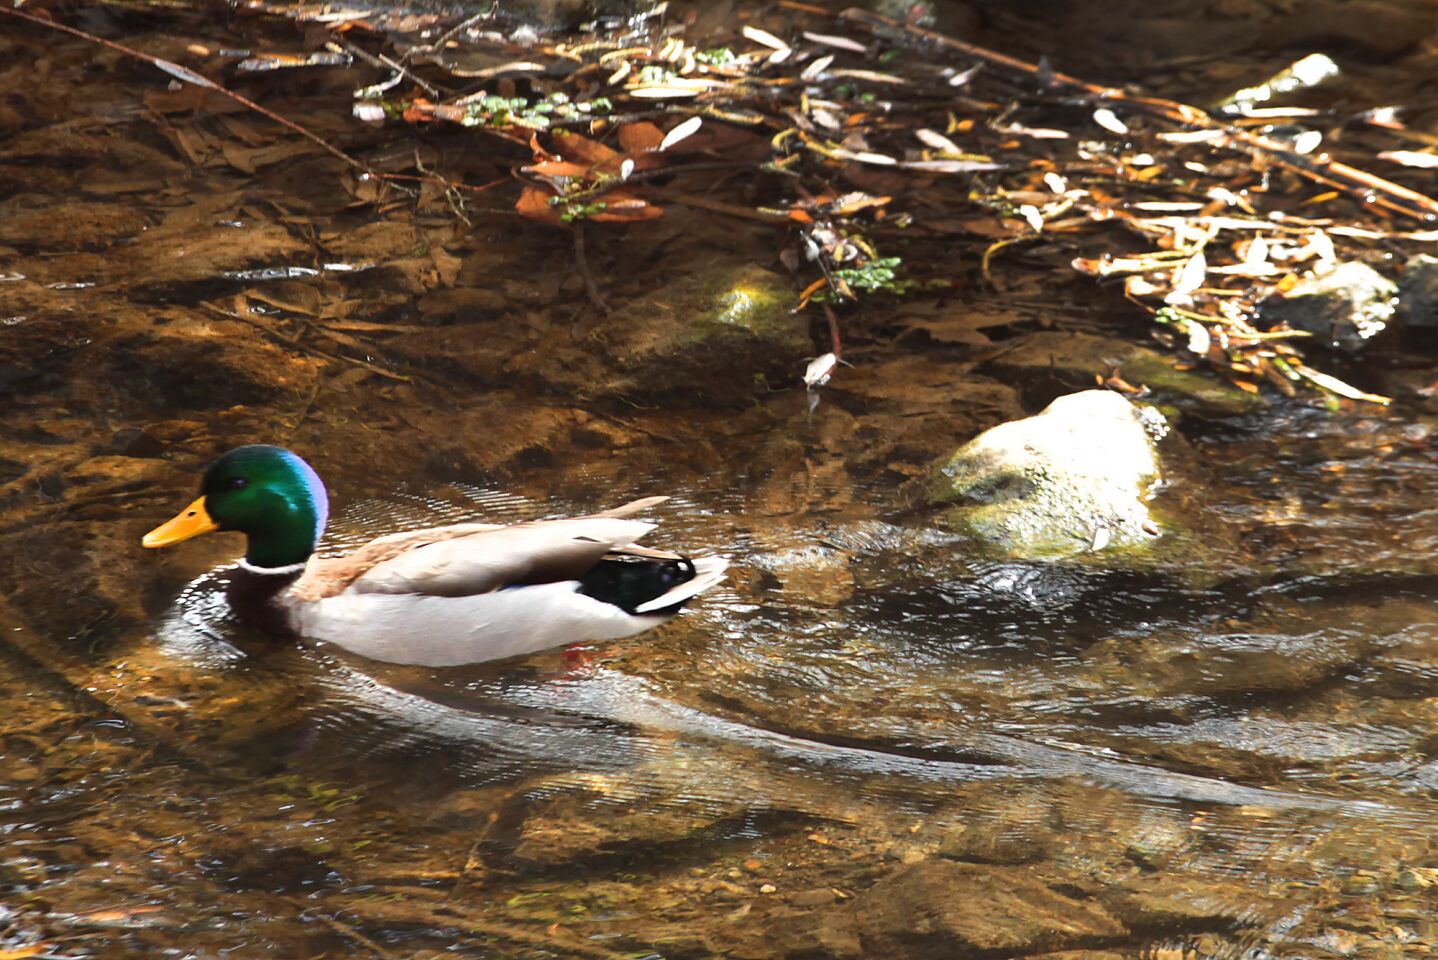 A mallard on the north fork of the Arroyo Conejo in Wildwood Park near Paradise Falls.